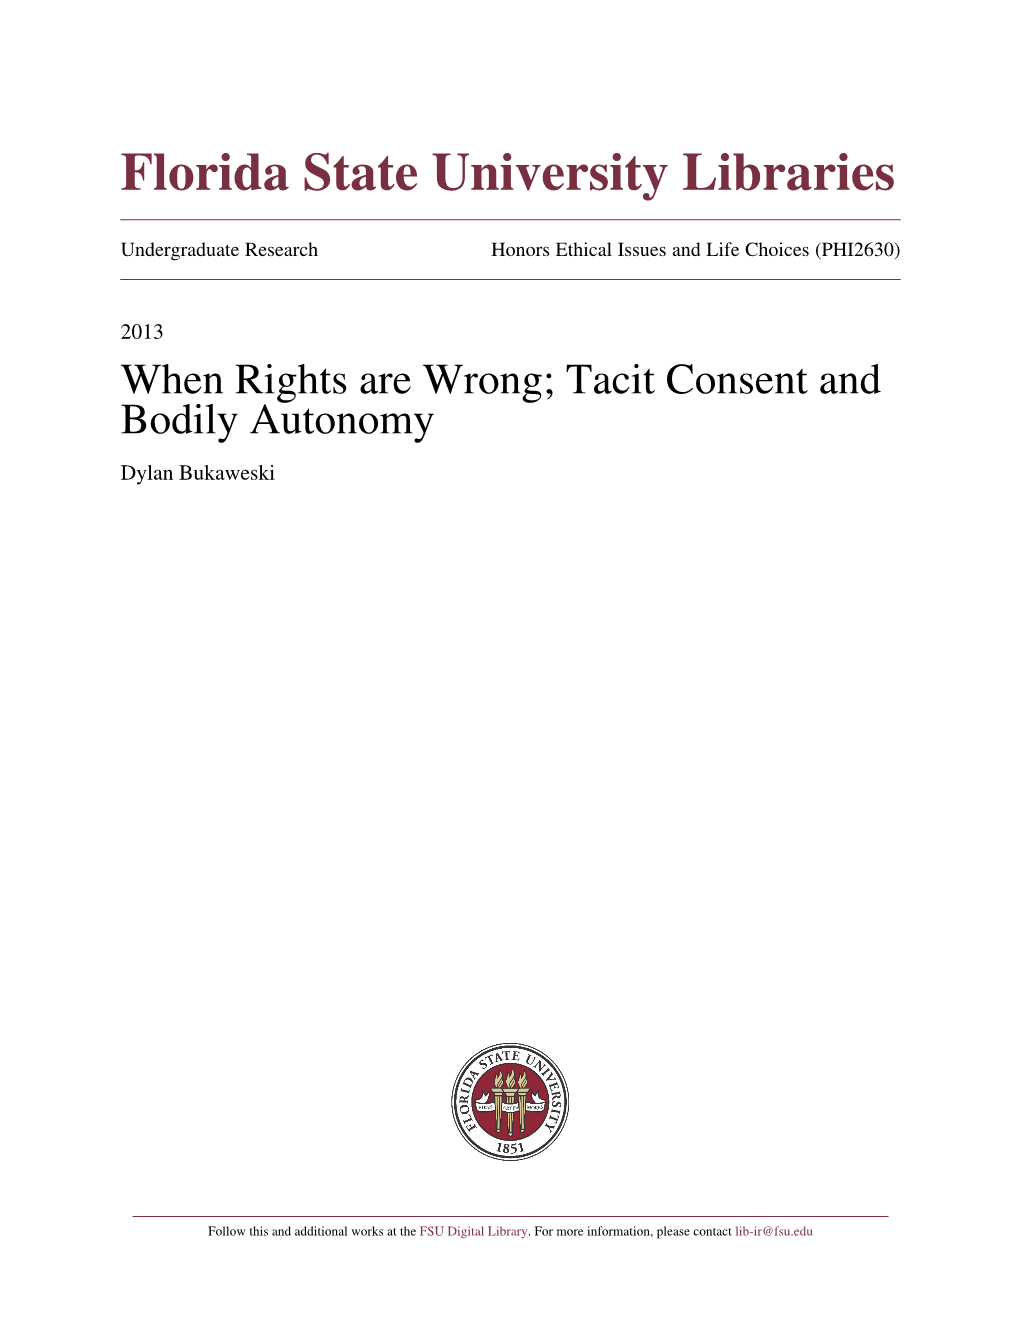 When Rights Are Wrong; Tacit Consent and Bodily Autonomy Dylan Bukaweski